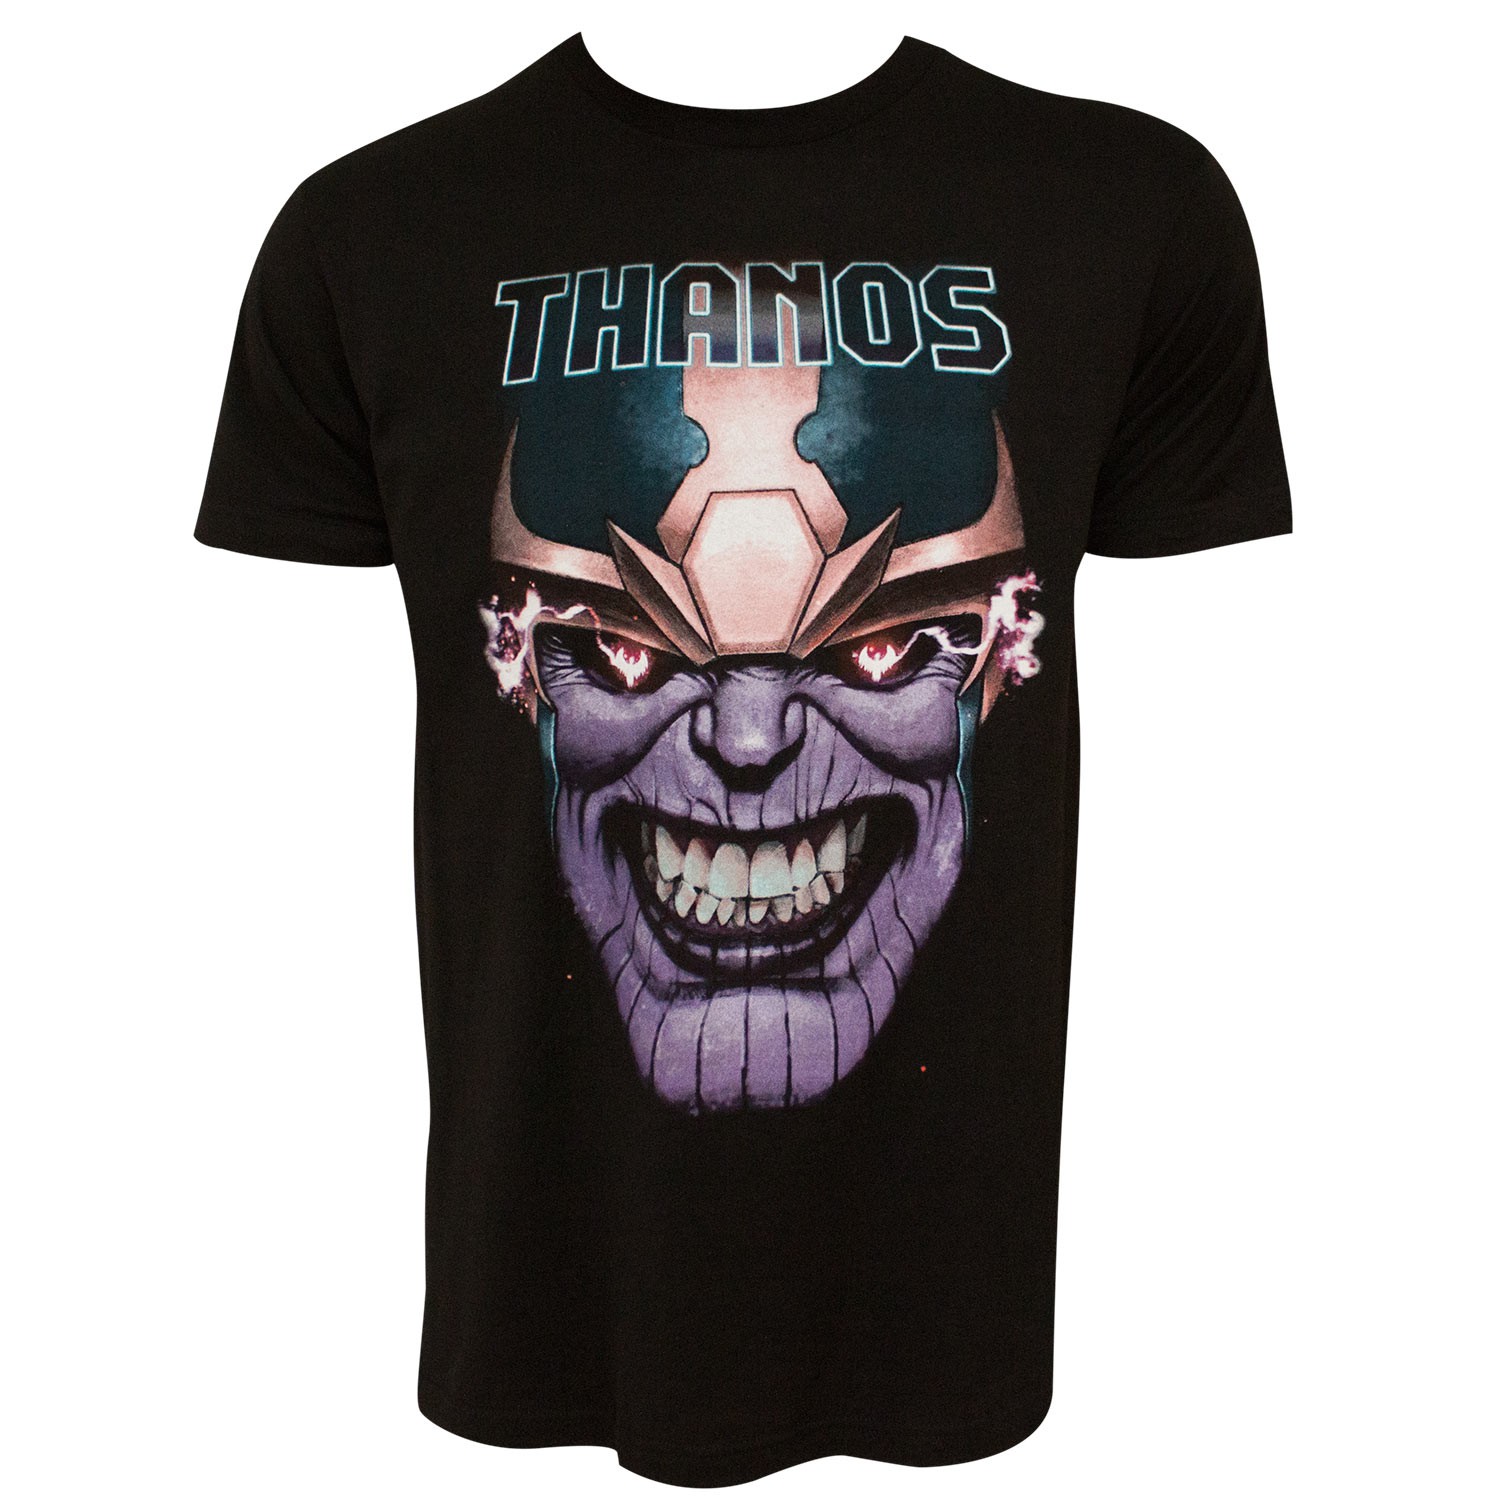 Avengers Infinity War Thanos Clenched Teeth Men's Black T-Shirt